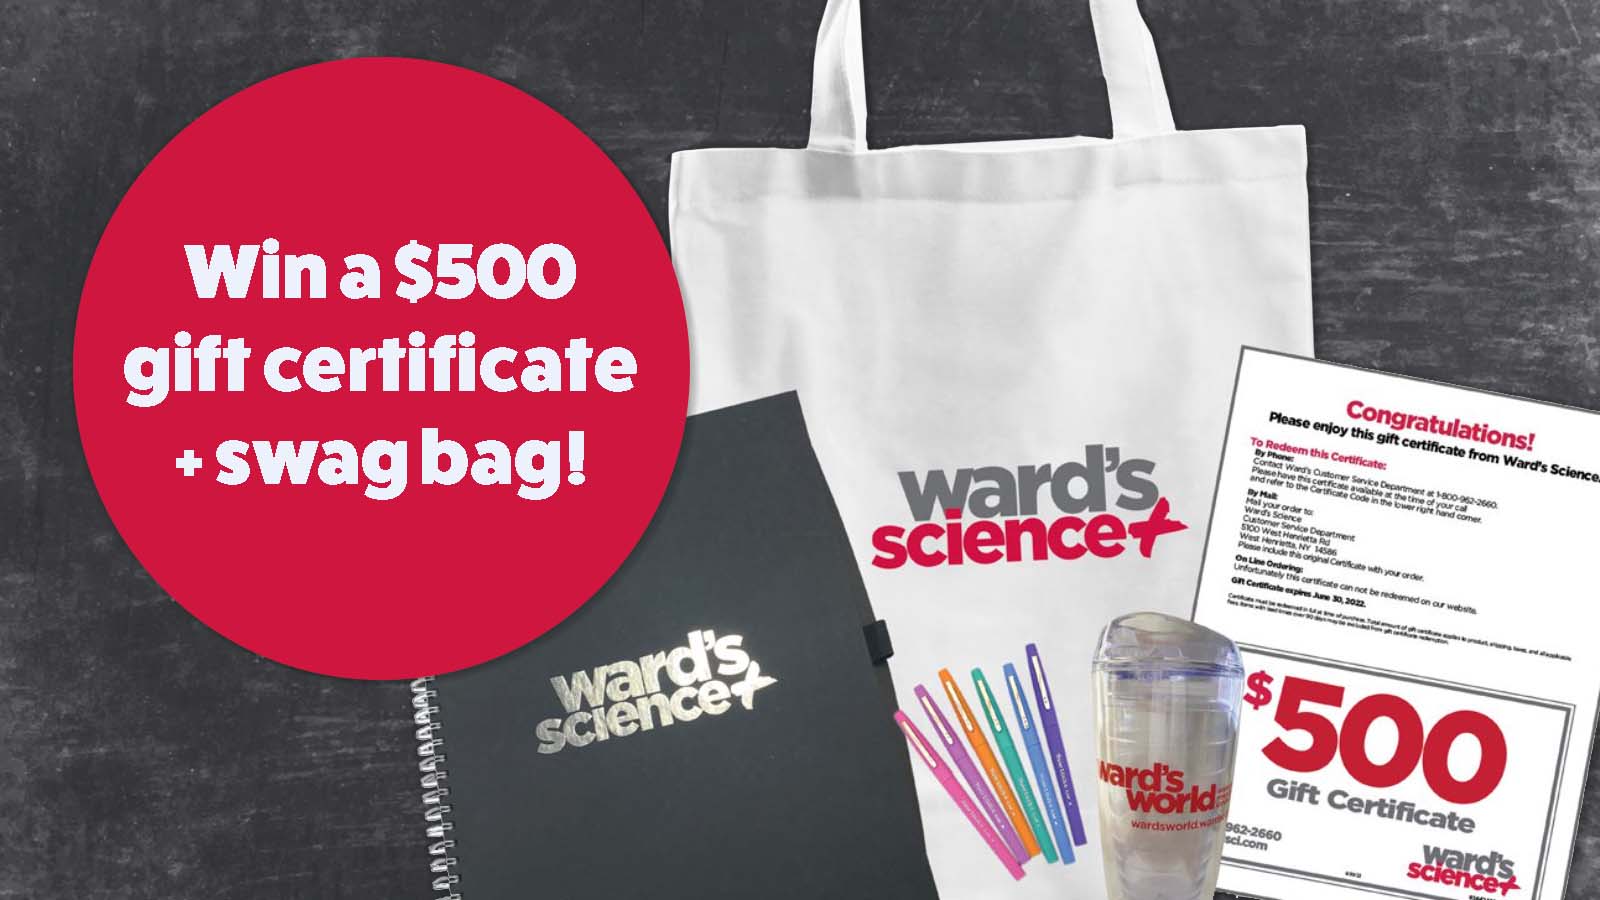 Win a $500 Gift Card and Swag Bag from Ward's Science!